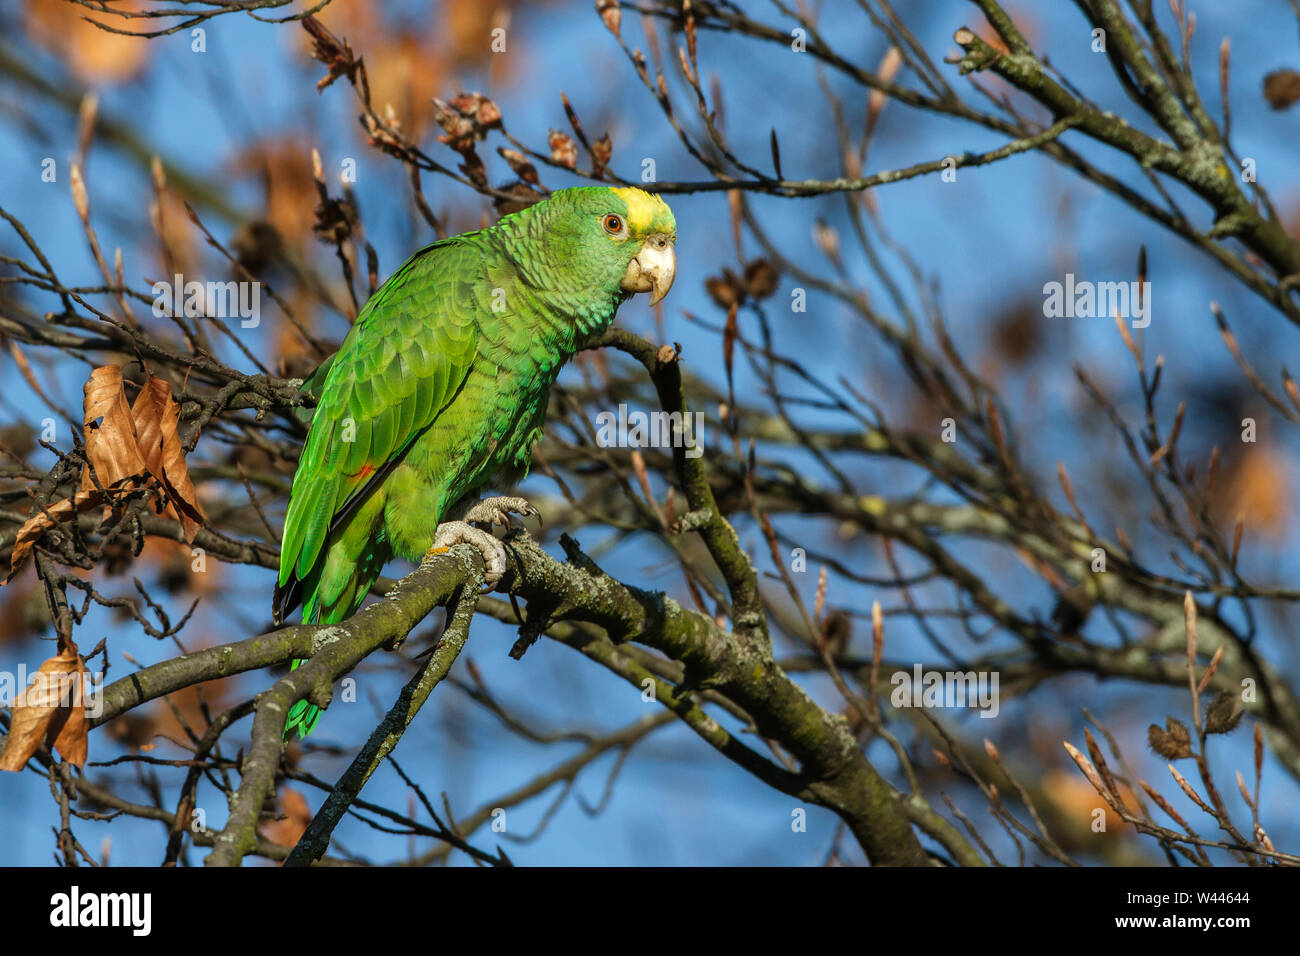 Nisthohlen High Resolution Stock Photography and Images - Alamy